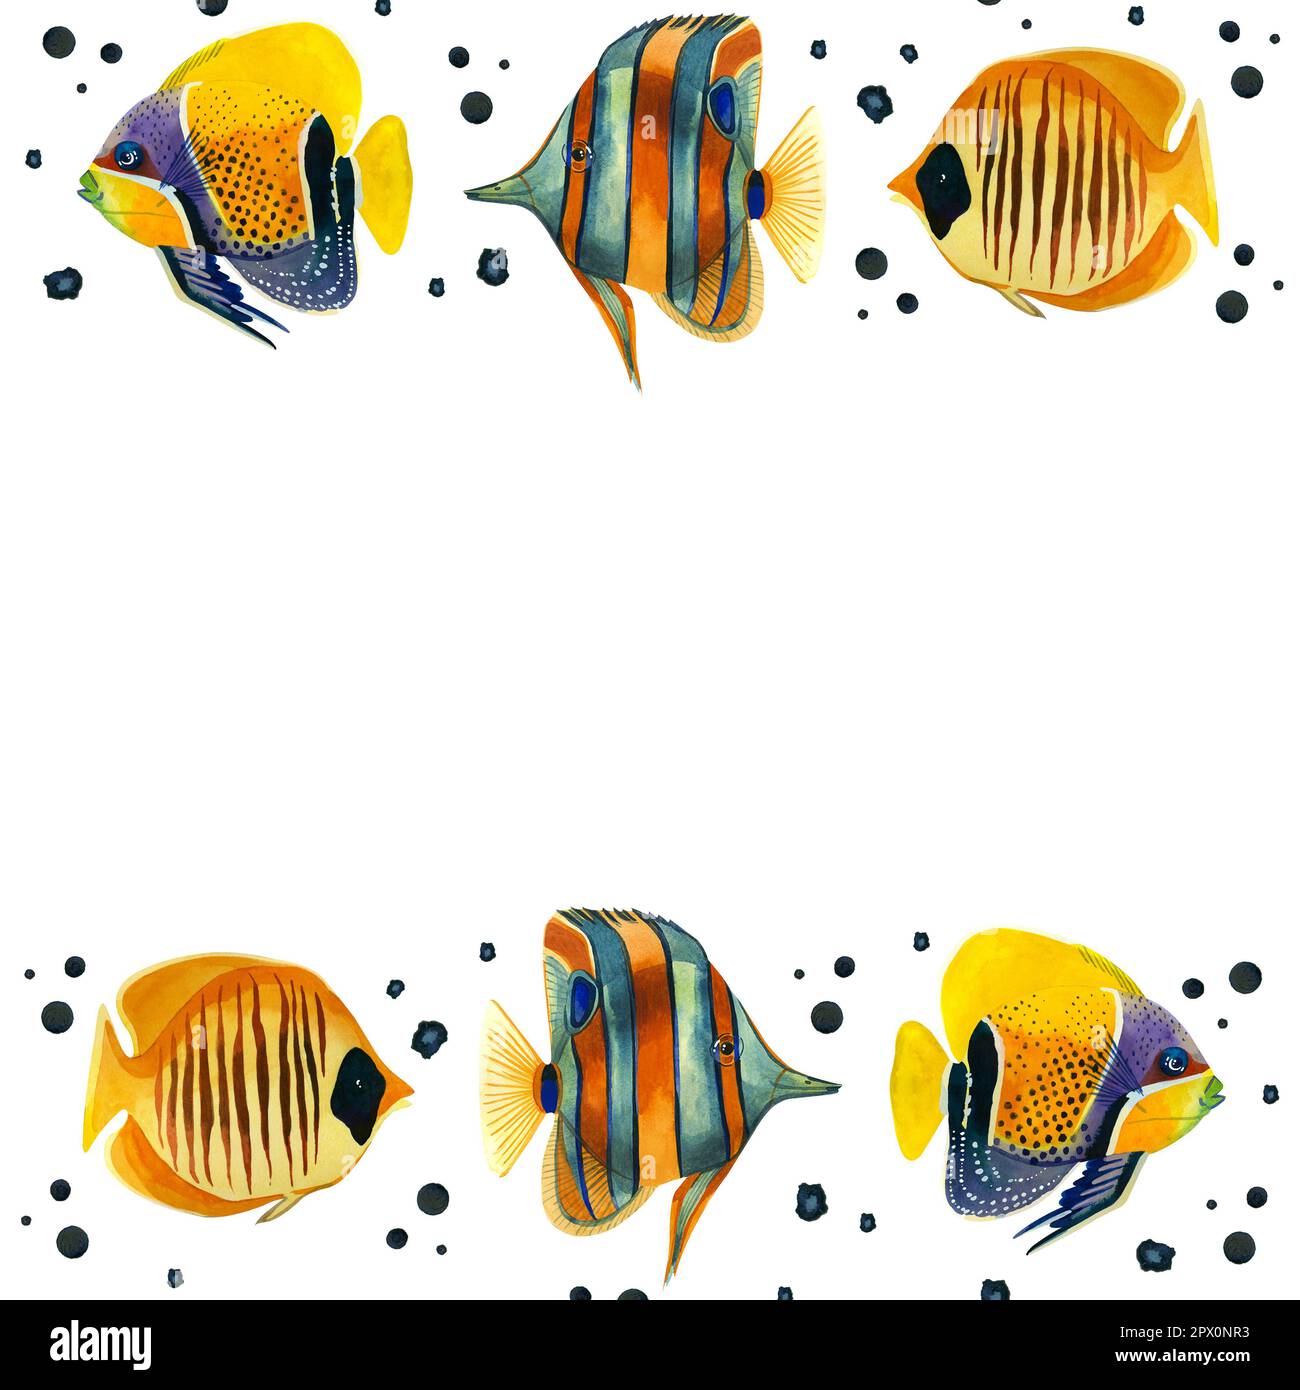 Square frame. Tropical fish of bright colors, drops on a white background. Everything is hand painted with watercolors. Ideal for printing Stock Photo